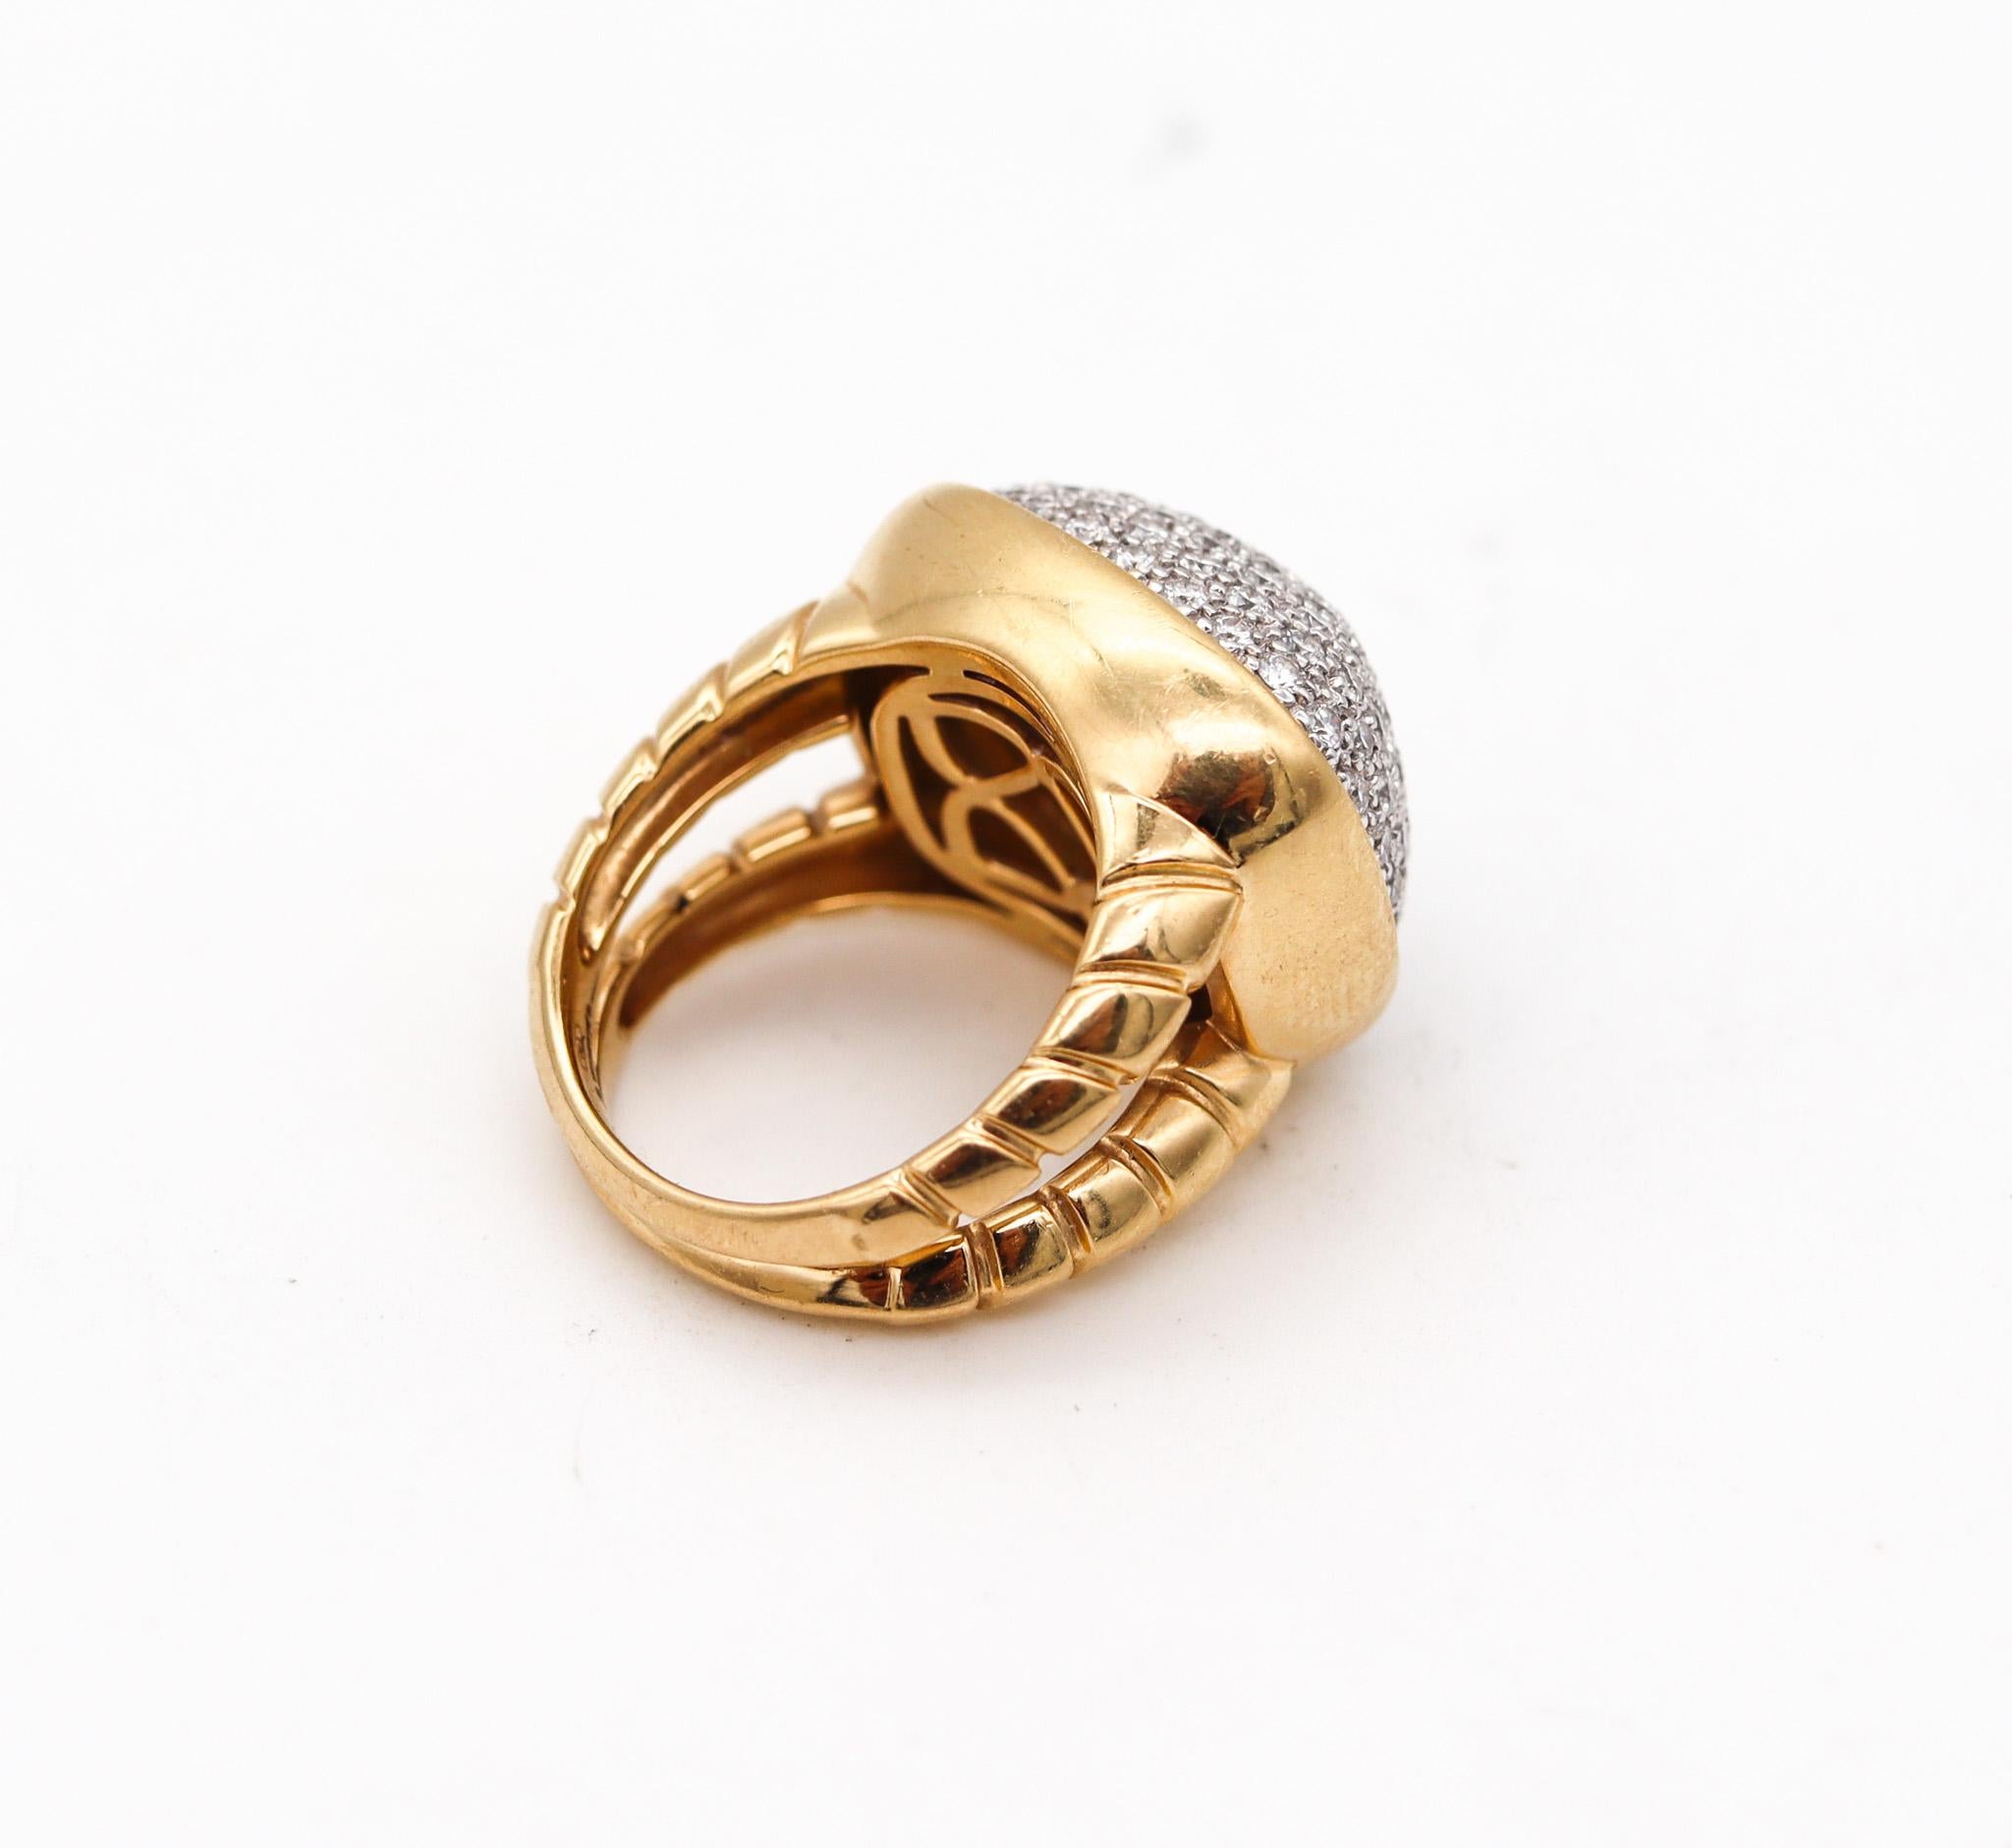 Brilliant Cut Marina B. Milano Tiguella Pave Cocktail Ring in 18kt Gold with 2.55ctw Diamonds For Sale